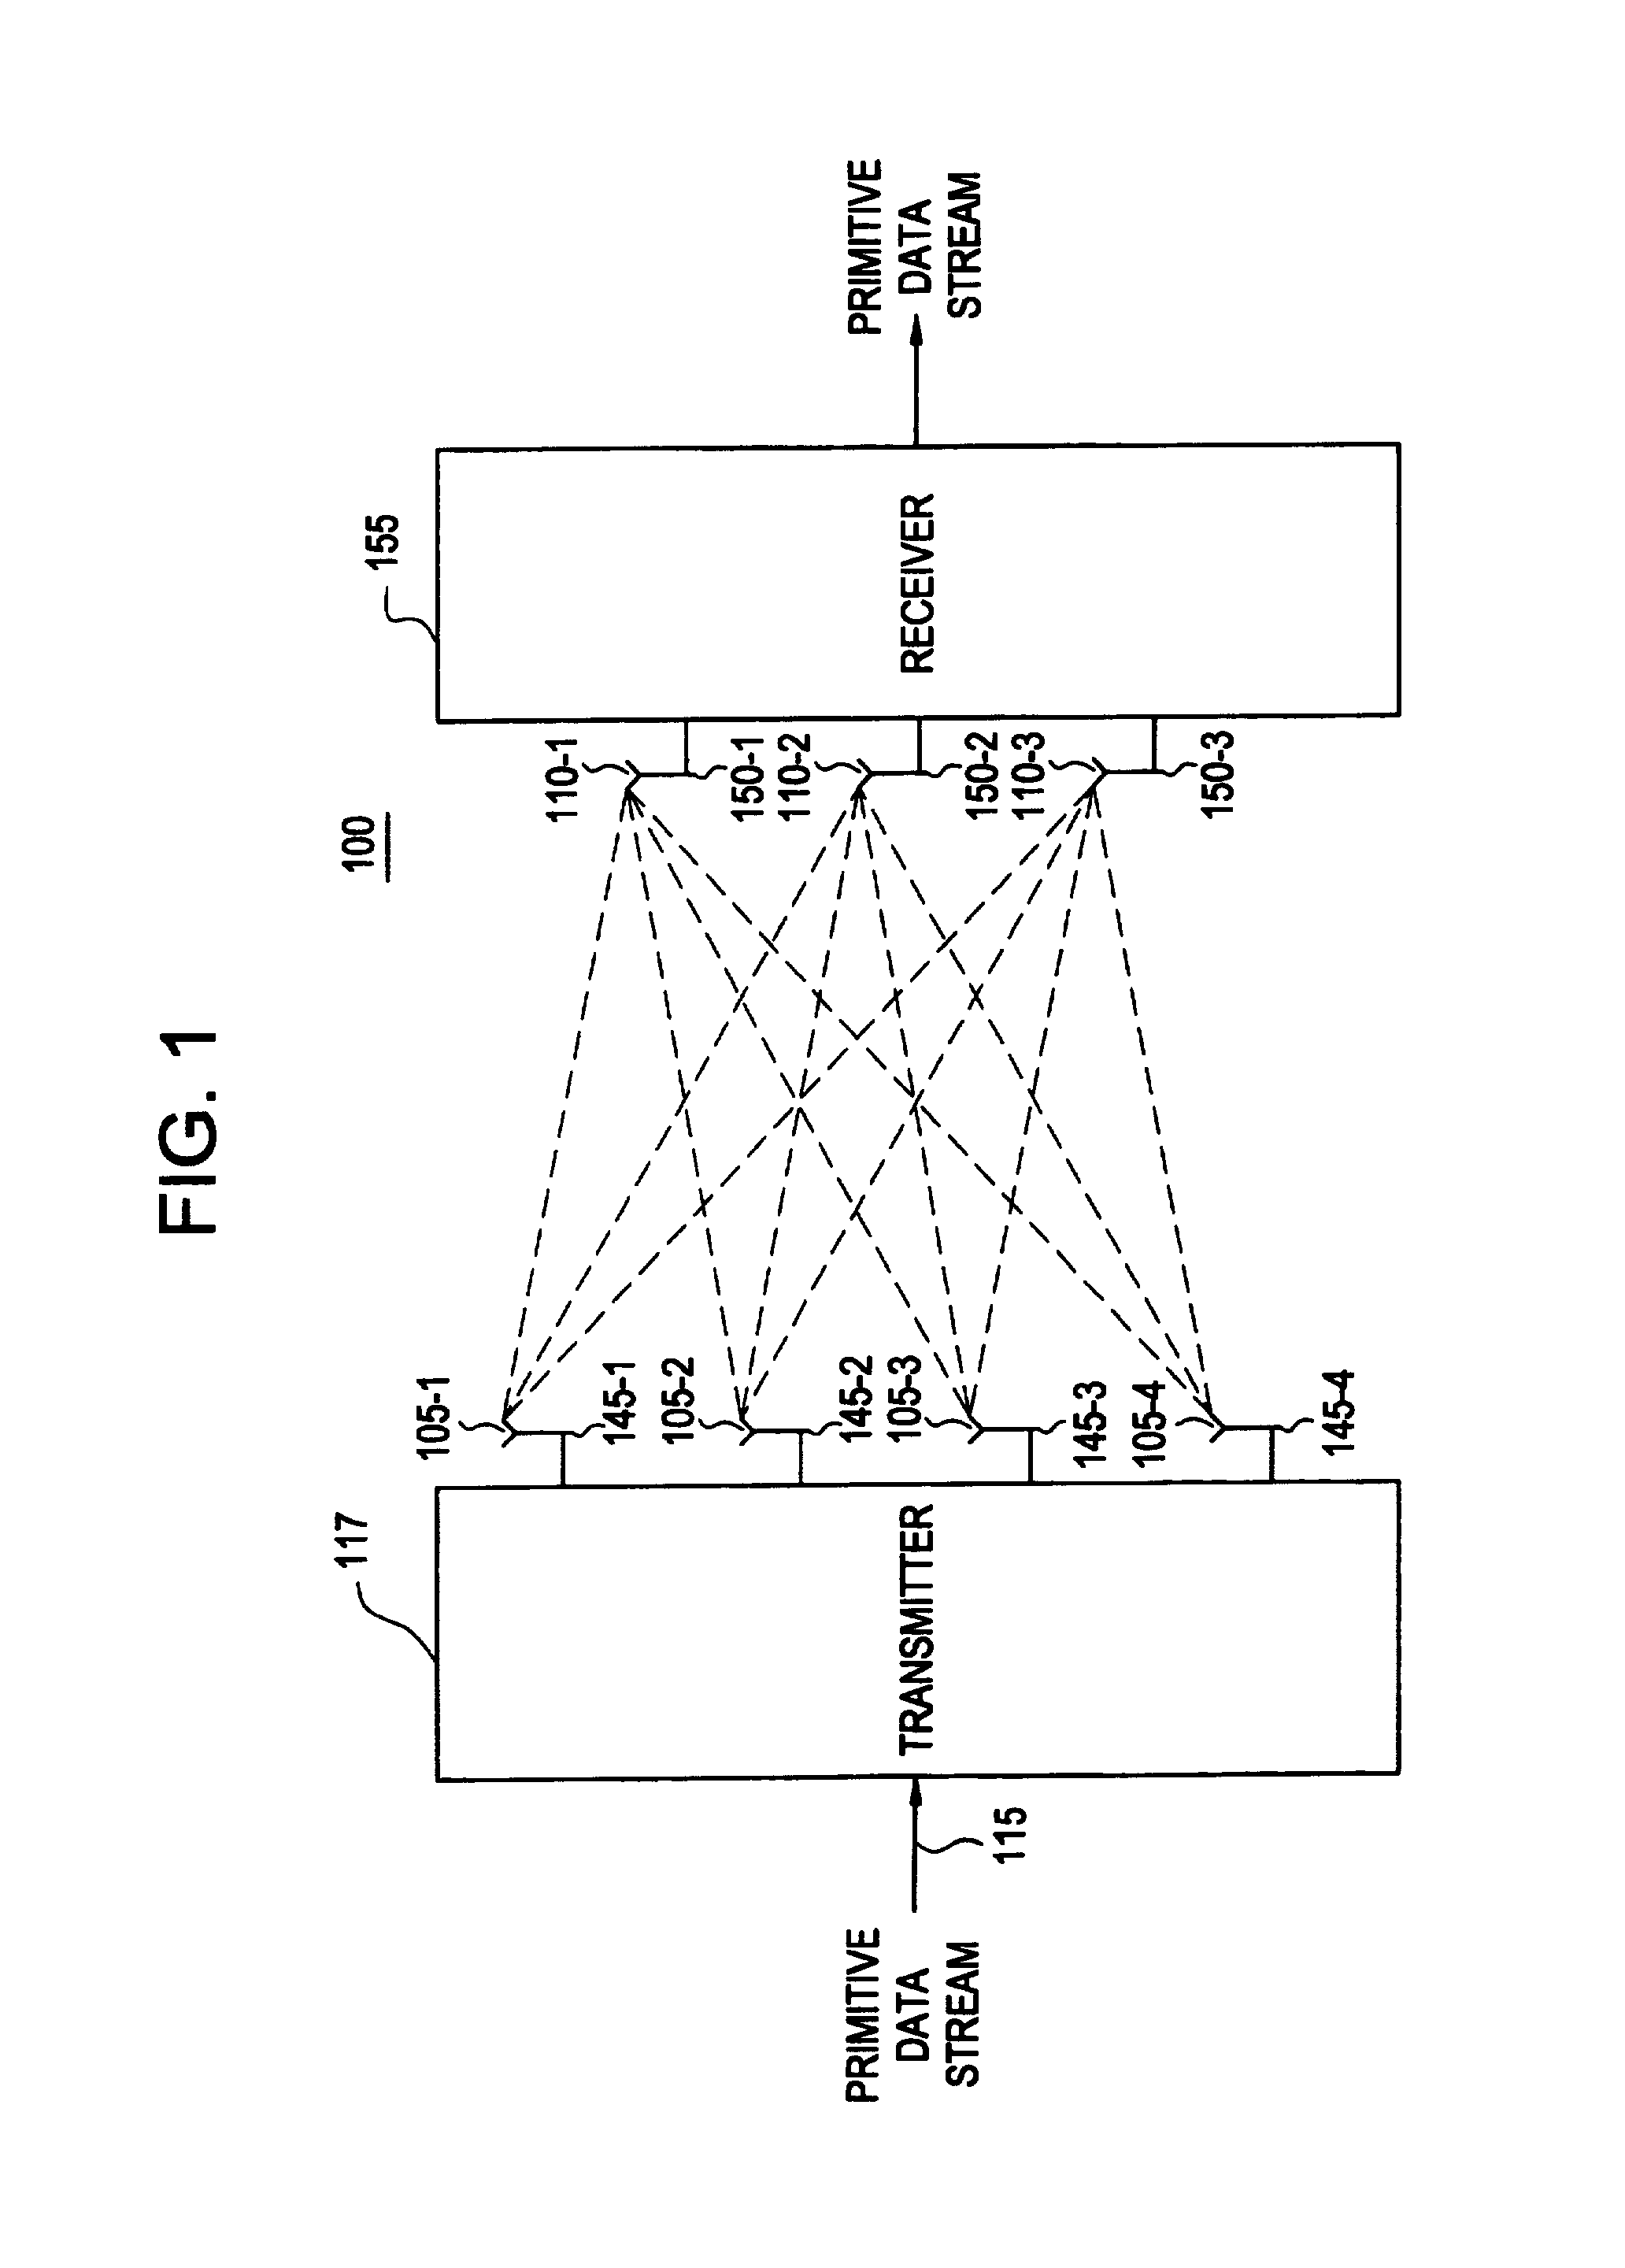 Wireless communication system using multi-element antenna having a space-time architecture